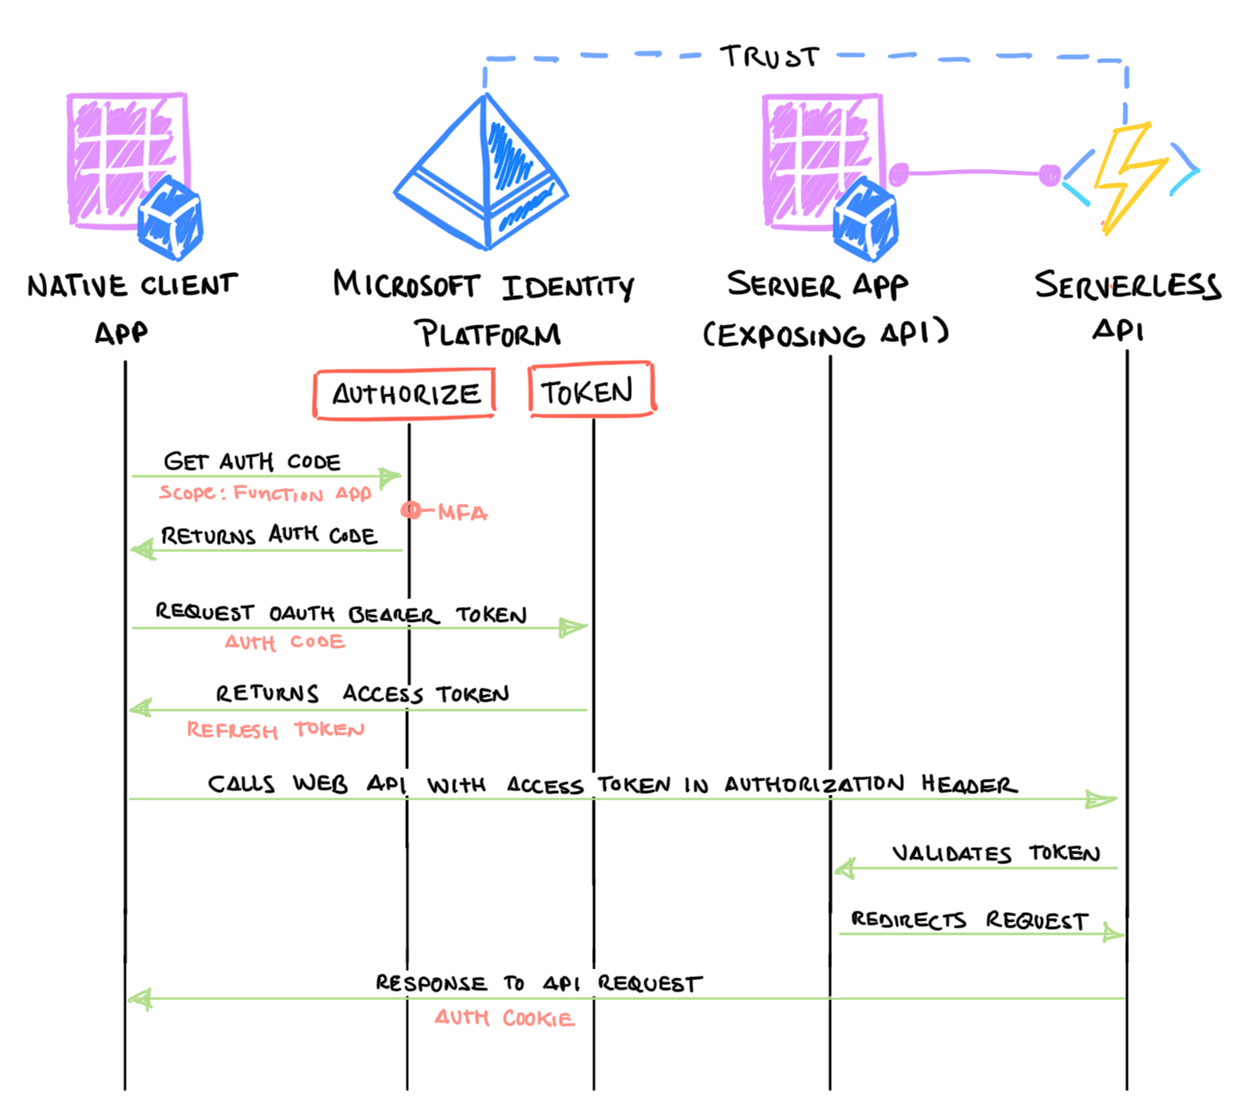 OAuth device authorization grant flow used by Cloud Katana.